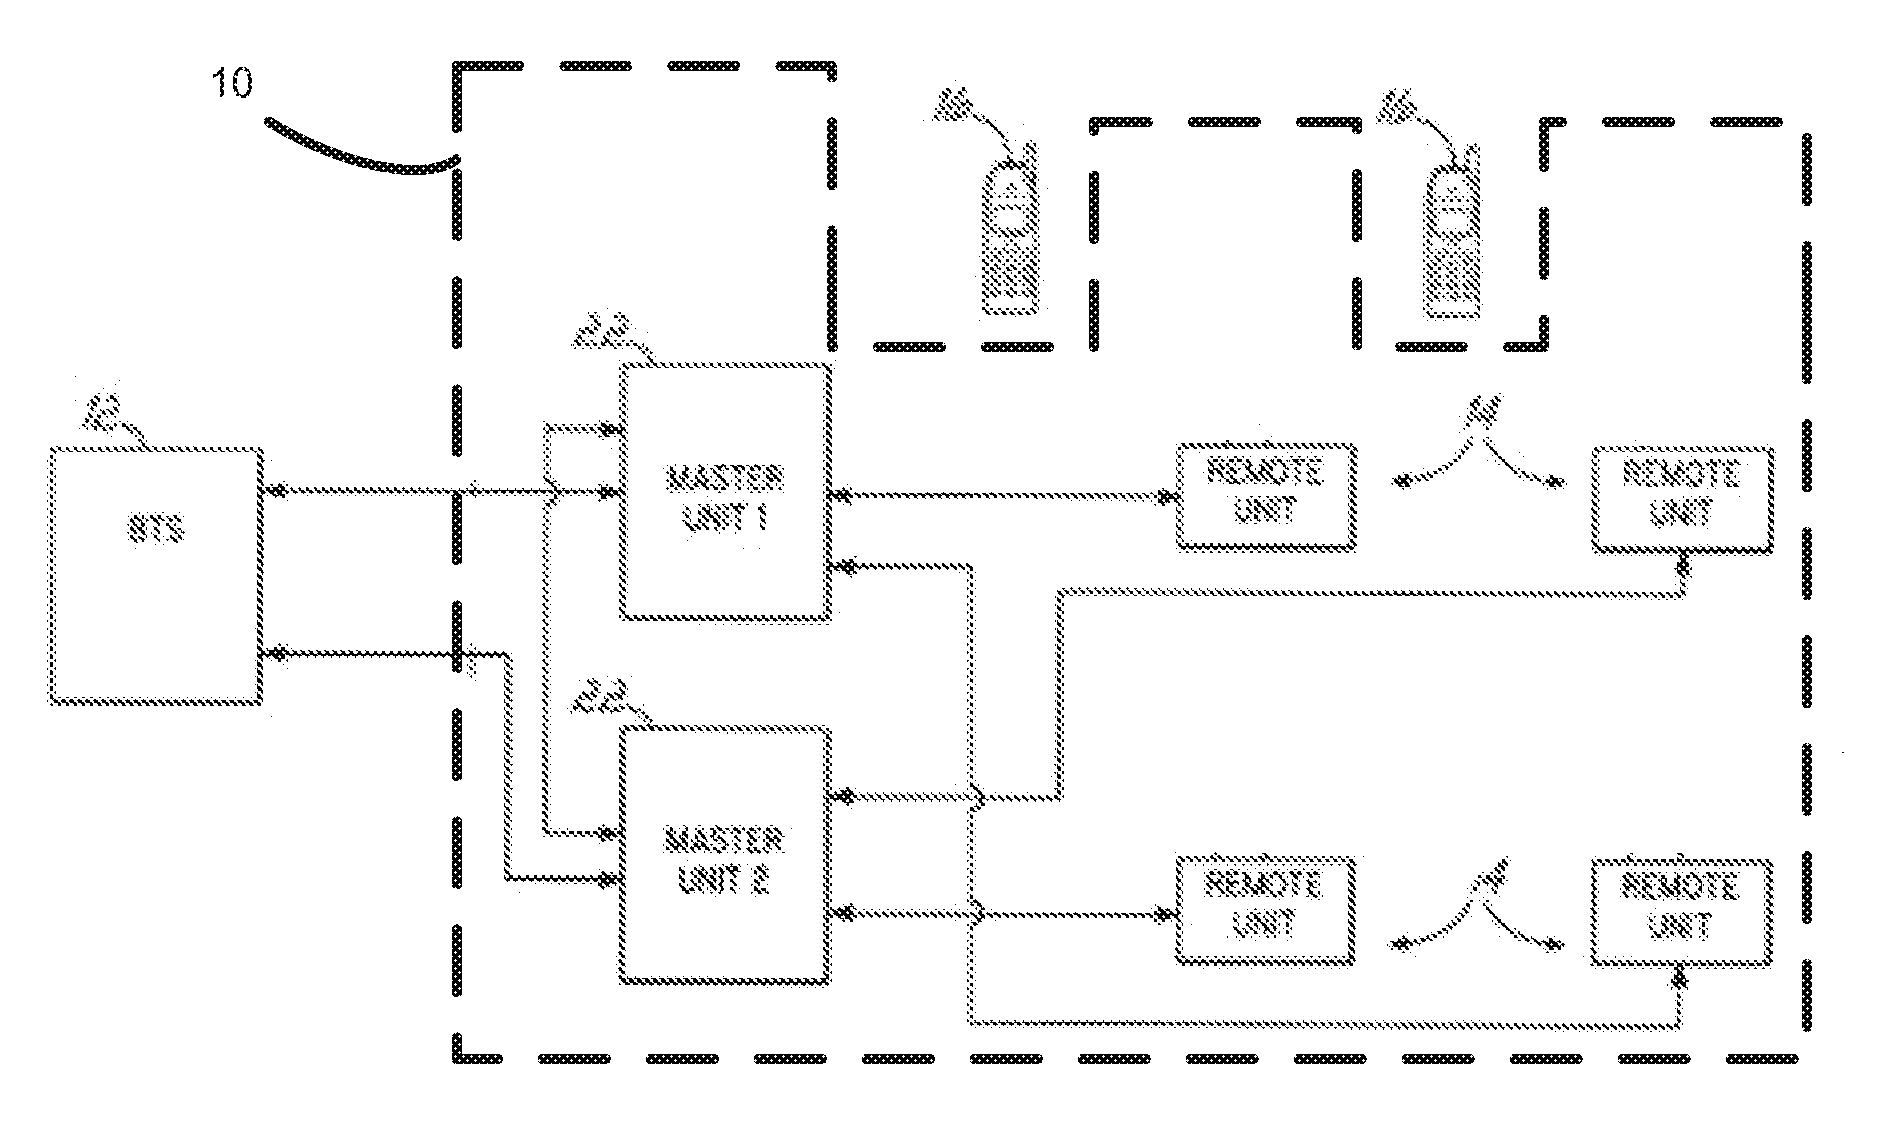 Distributed antenna system using power-over-ethernet